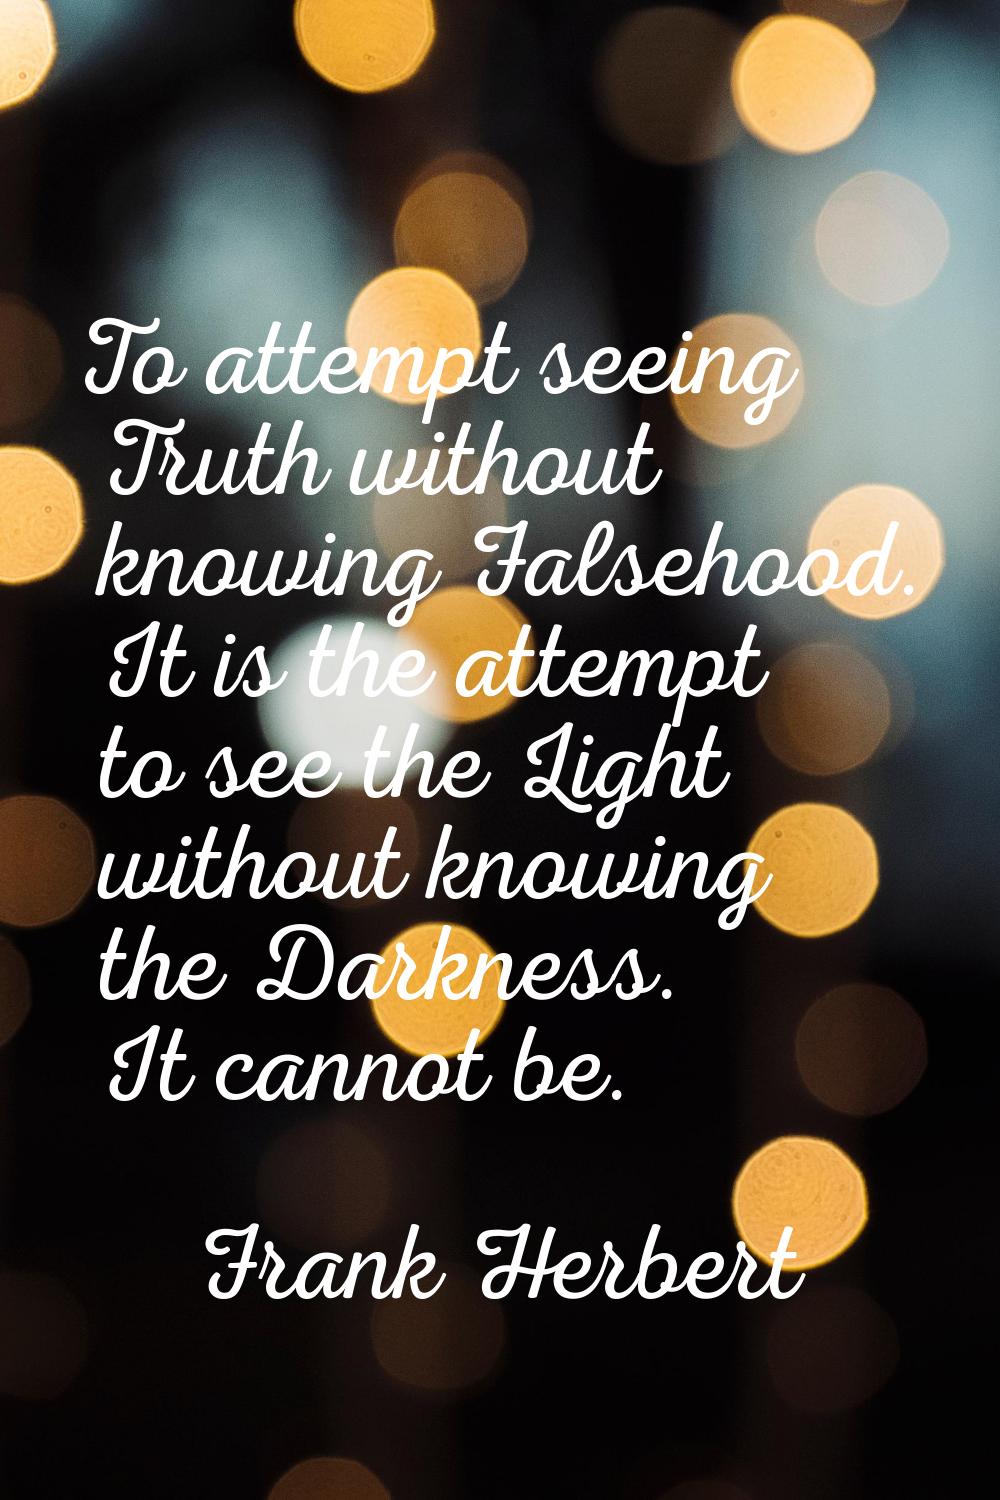 To attempt seeing Truth without knowing Falsehood. It is the attempt to see the Light without knowi